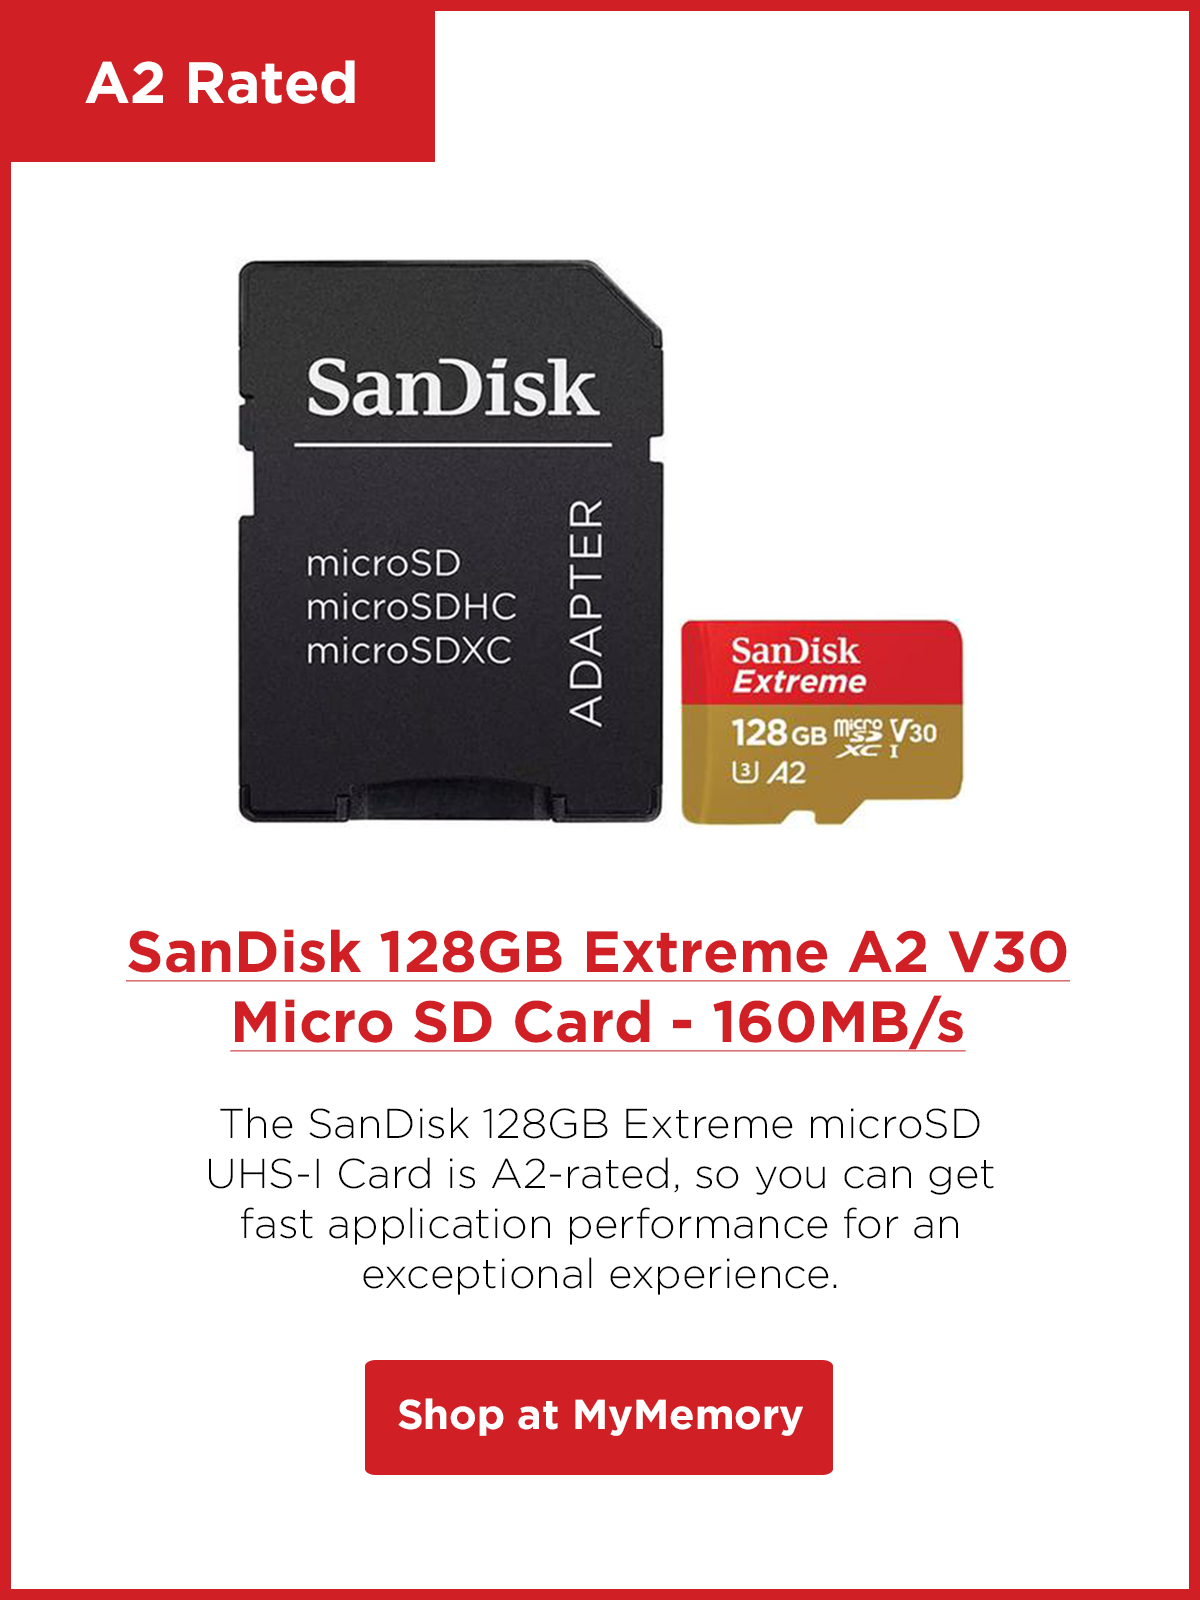 SanDisk 128GB Extreme A2 V30 Micro SD Card (SDXC) UHS-I U3 + Adapter- 160MB/s